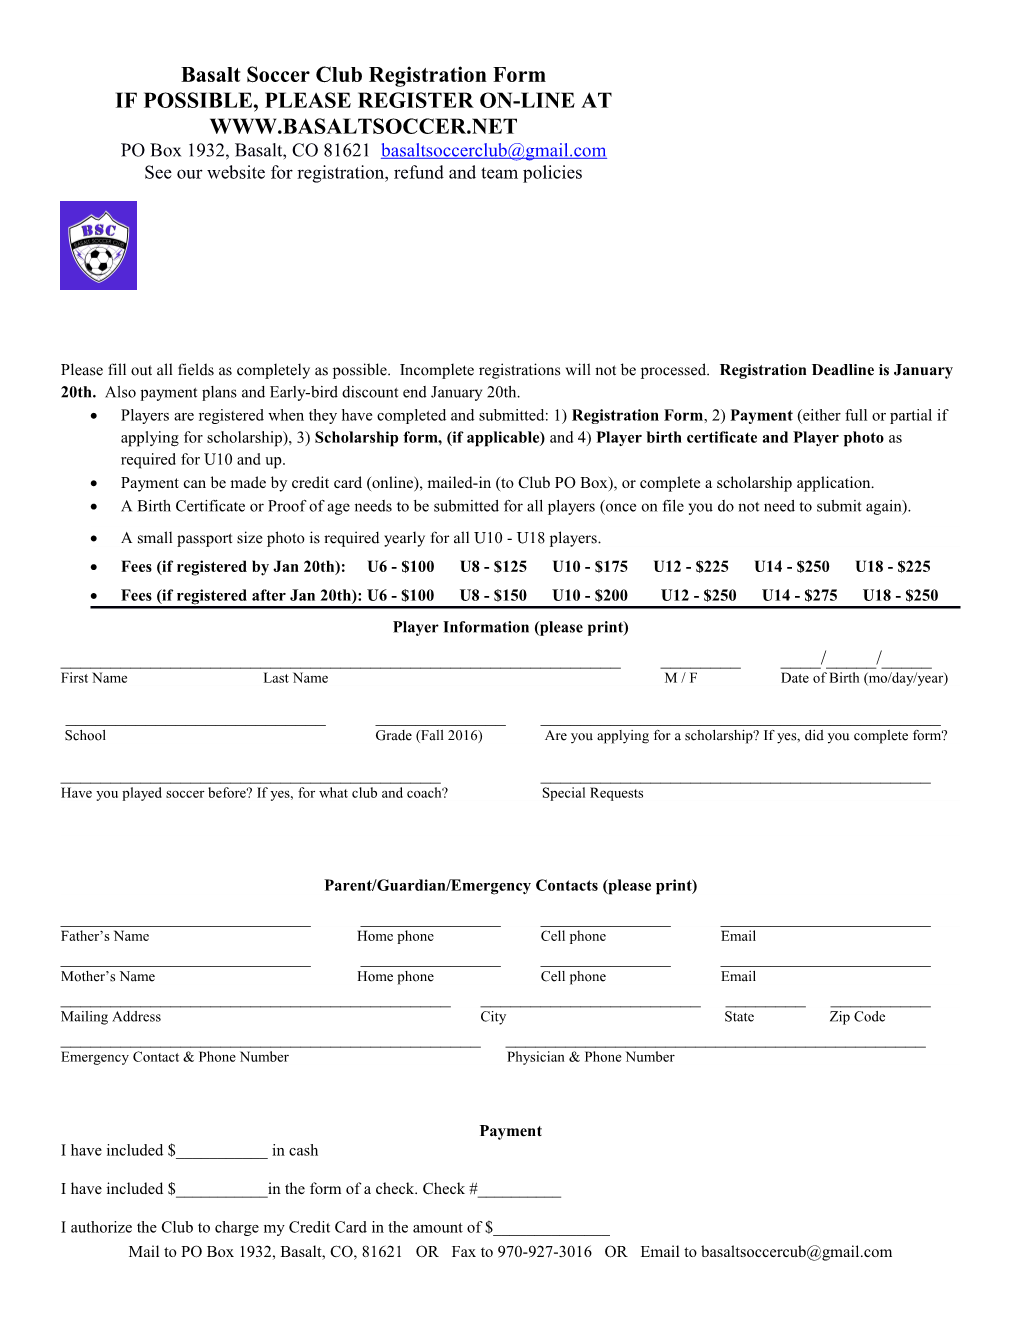 Please Fill out All Fields As Completely As Possible. Incomplete Registrations Will Not